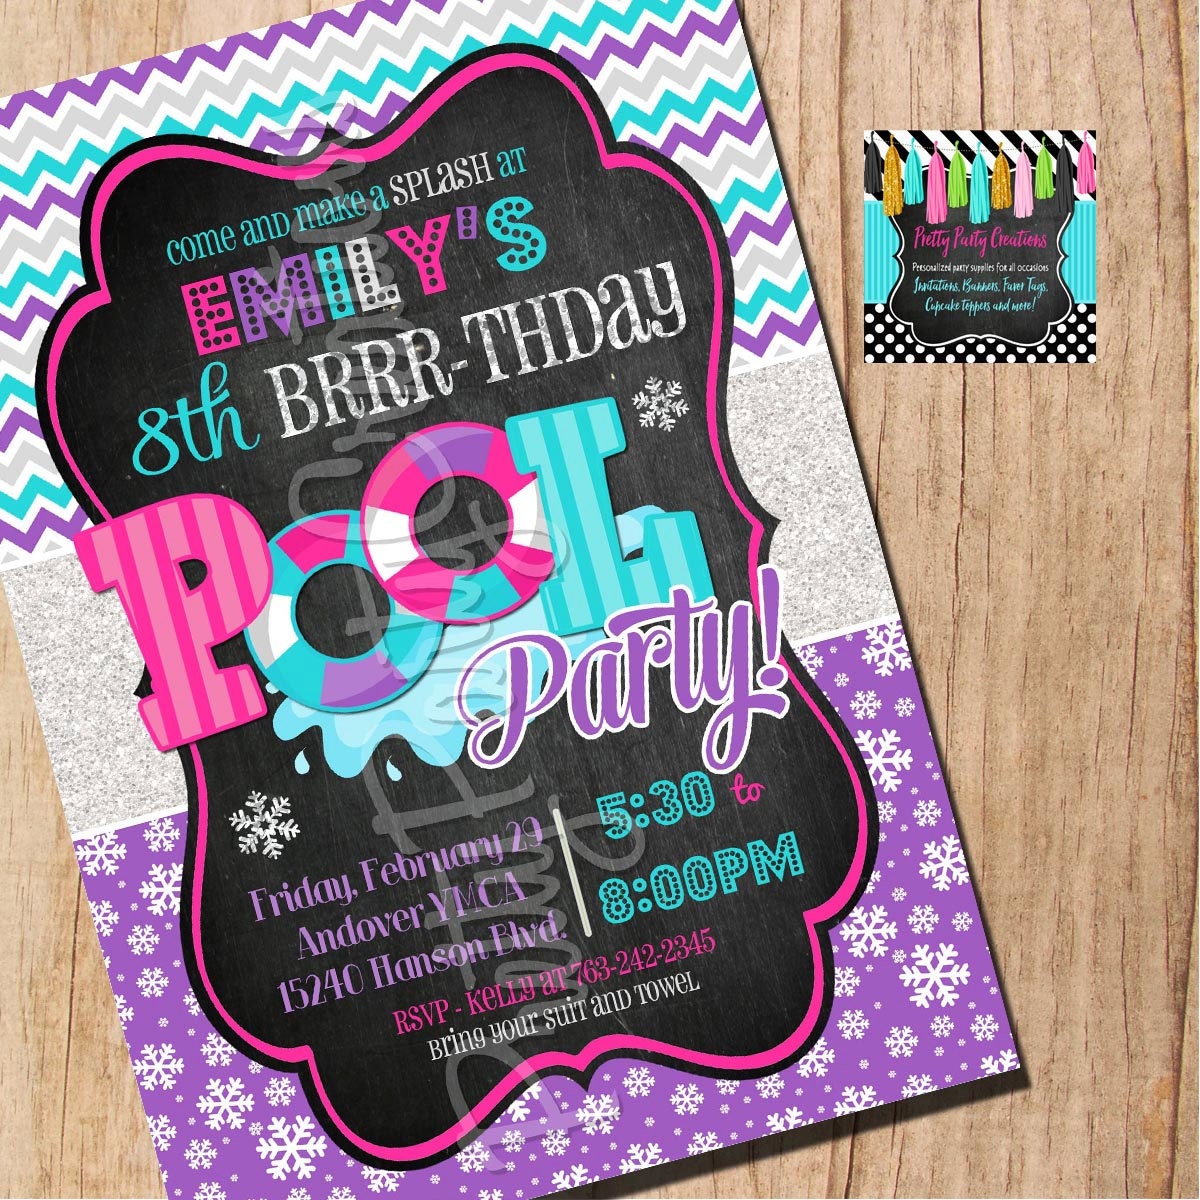 WINTER POOL PARTY Invitation You Print